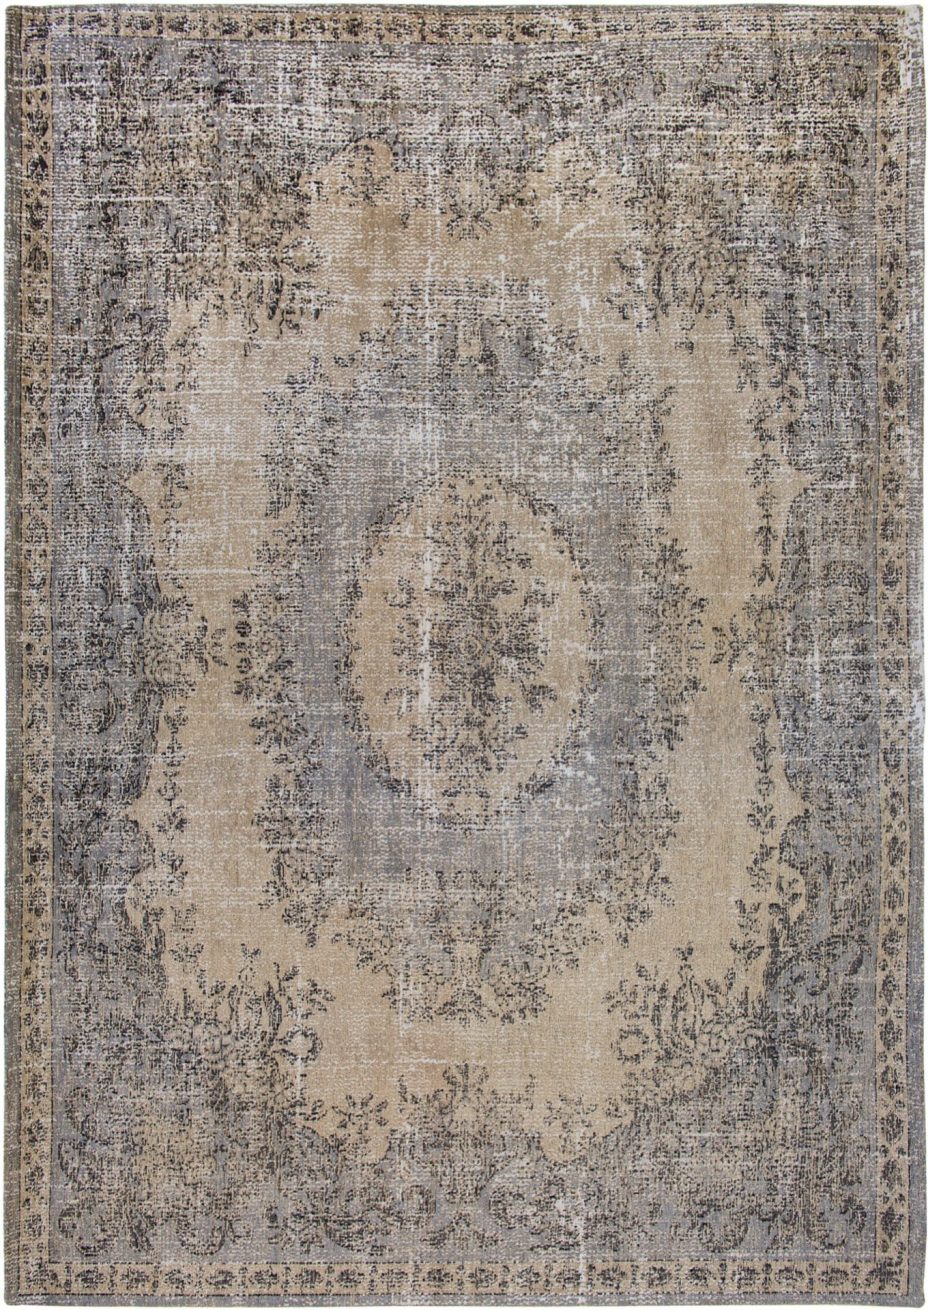 Palazzo Collection Da Mosto Colonna Taupe 9138 rug by Louis De Poortere